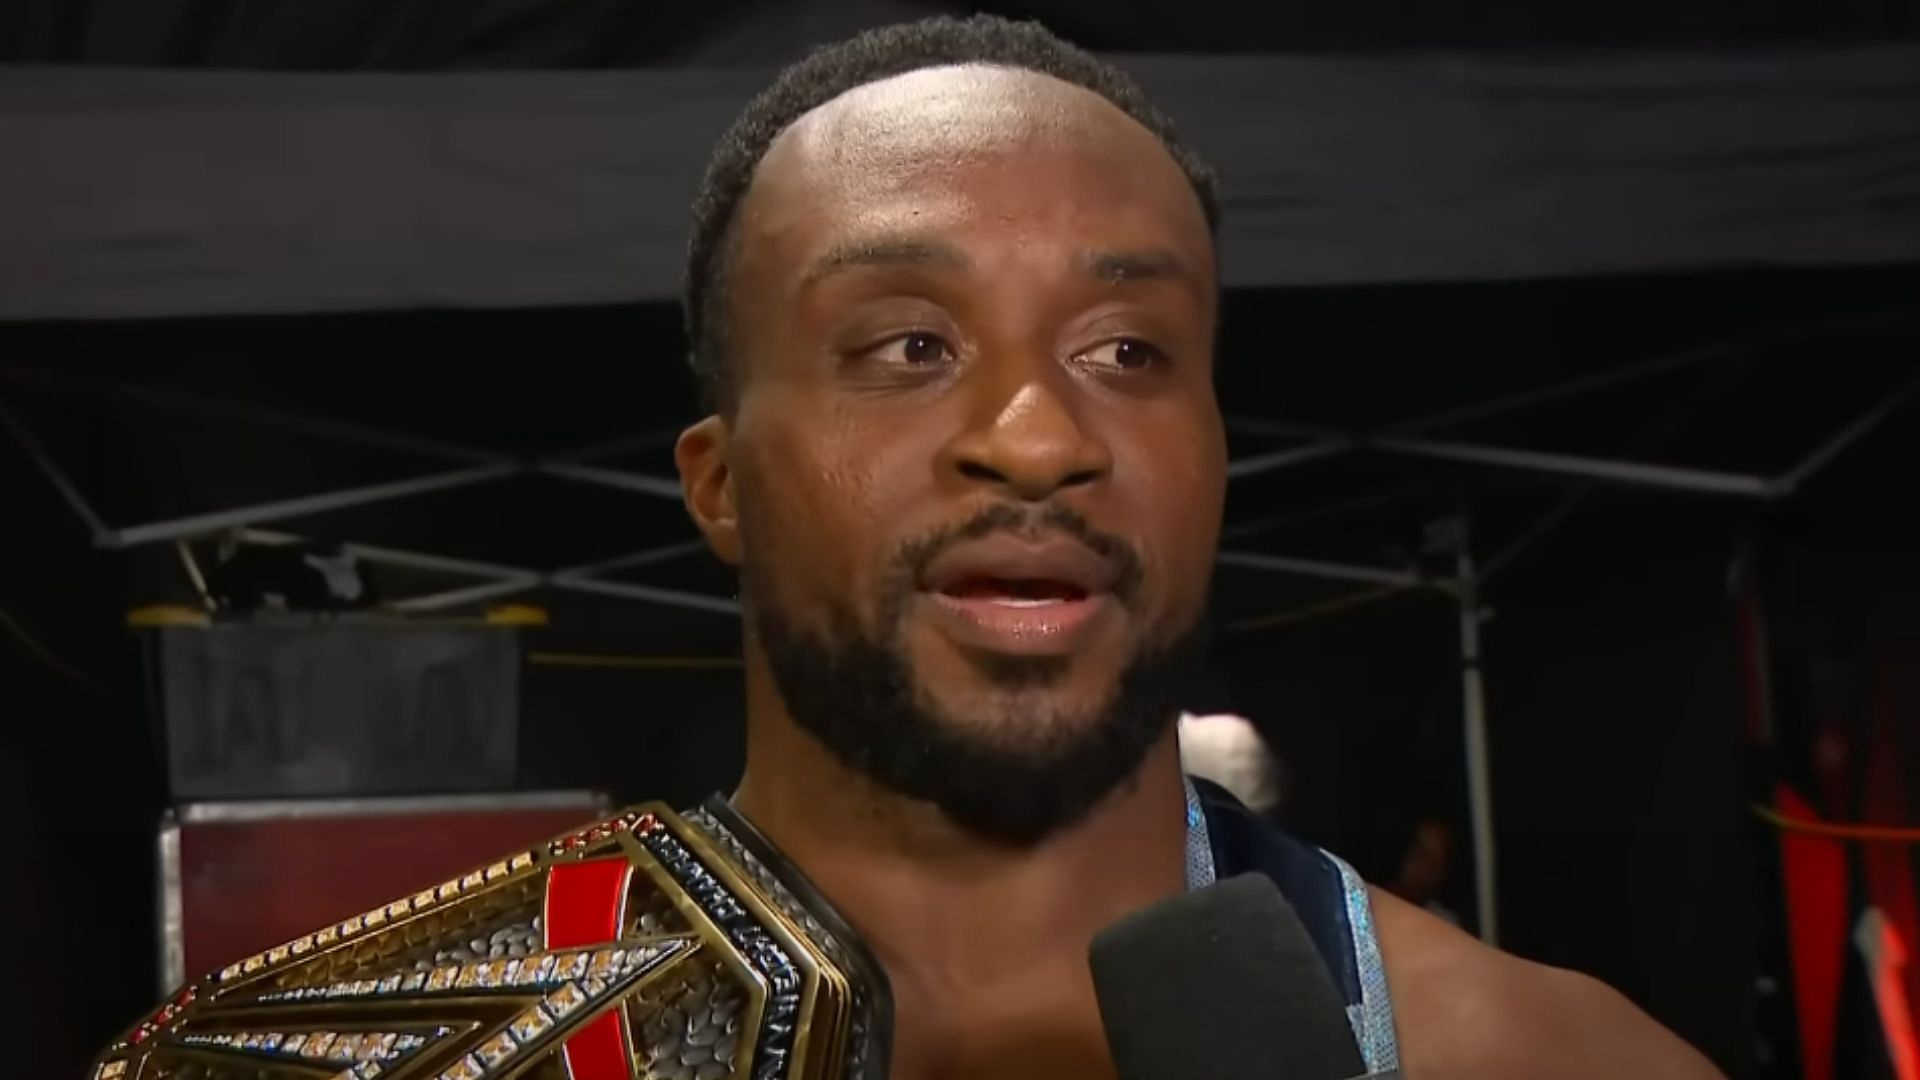 Big E has worked for WWE since 2009.